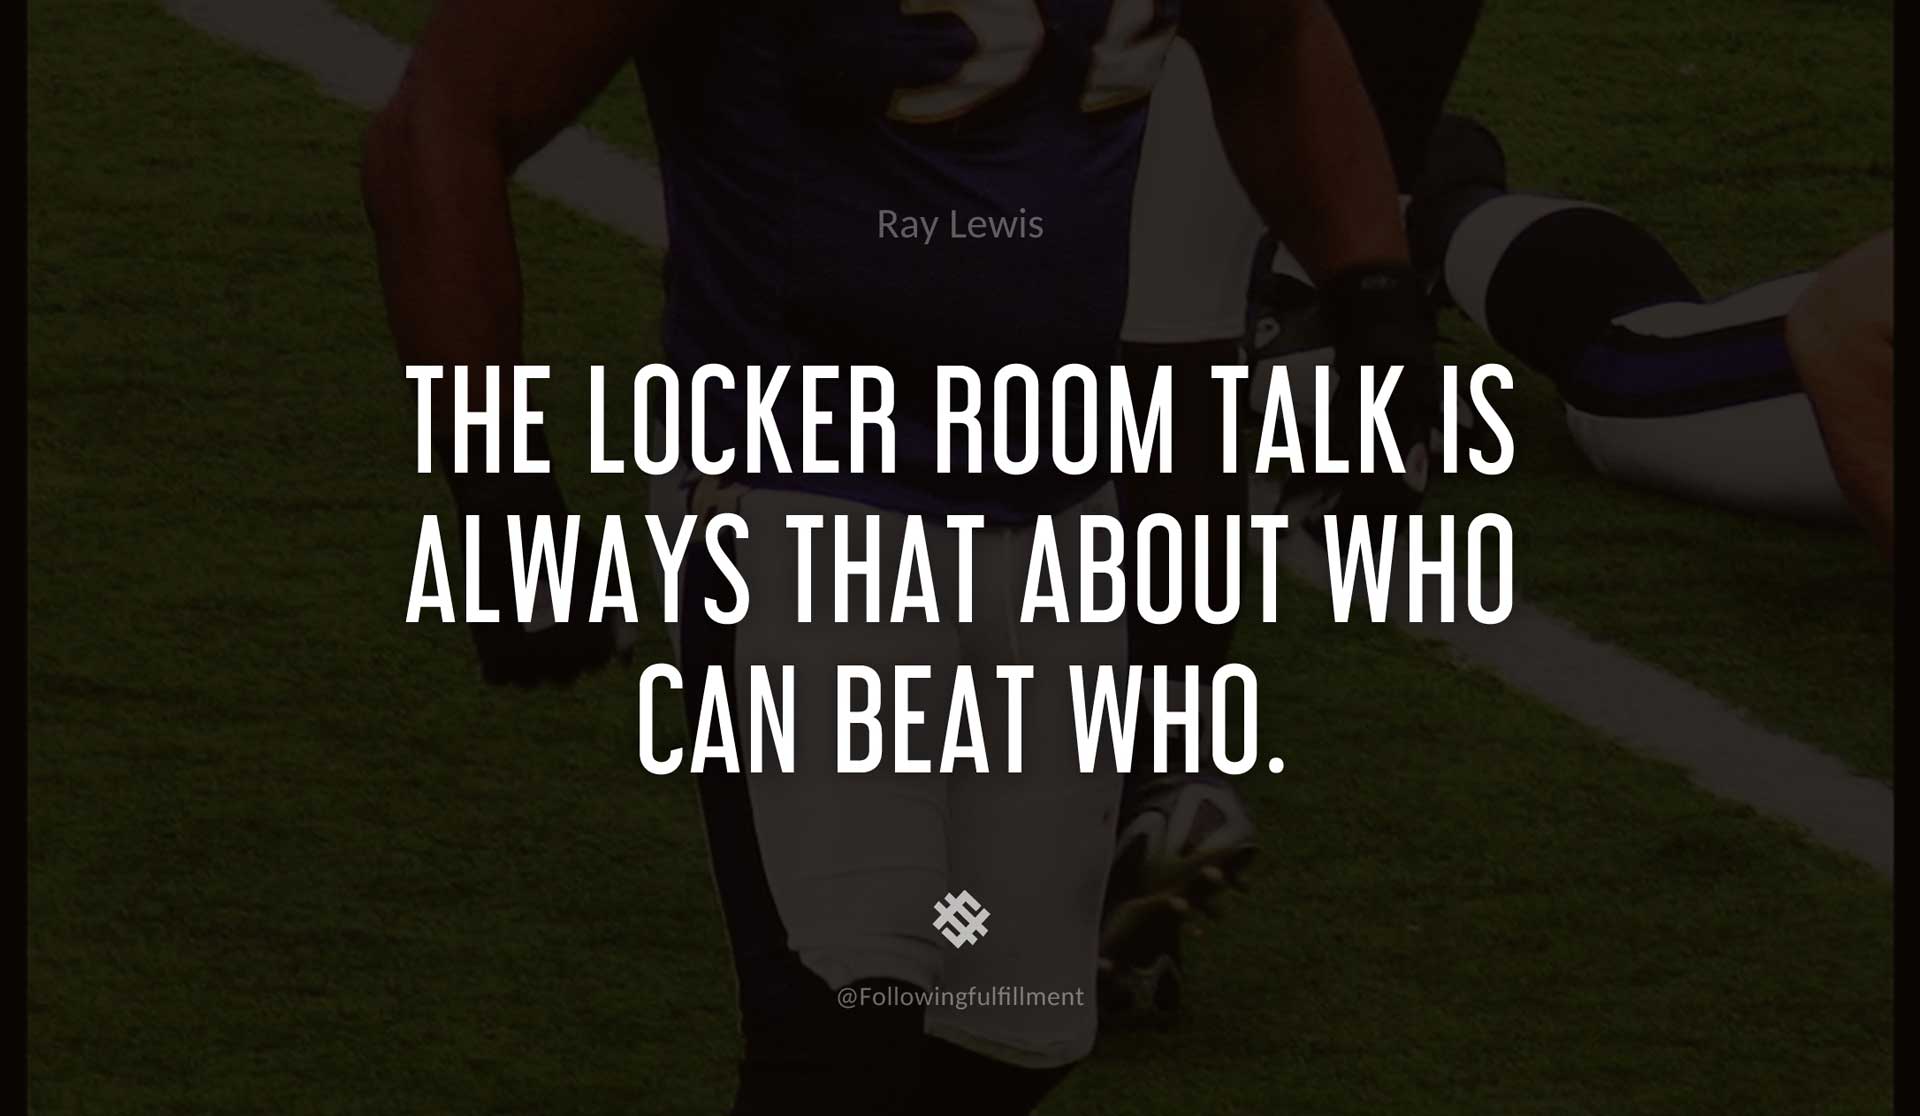 The-locker-room-talk-is-always-that-about-who-can-beat-who.-RAY-LEWIS-Quote.jpg